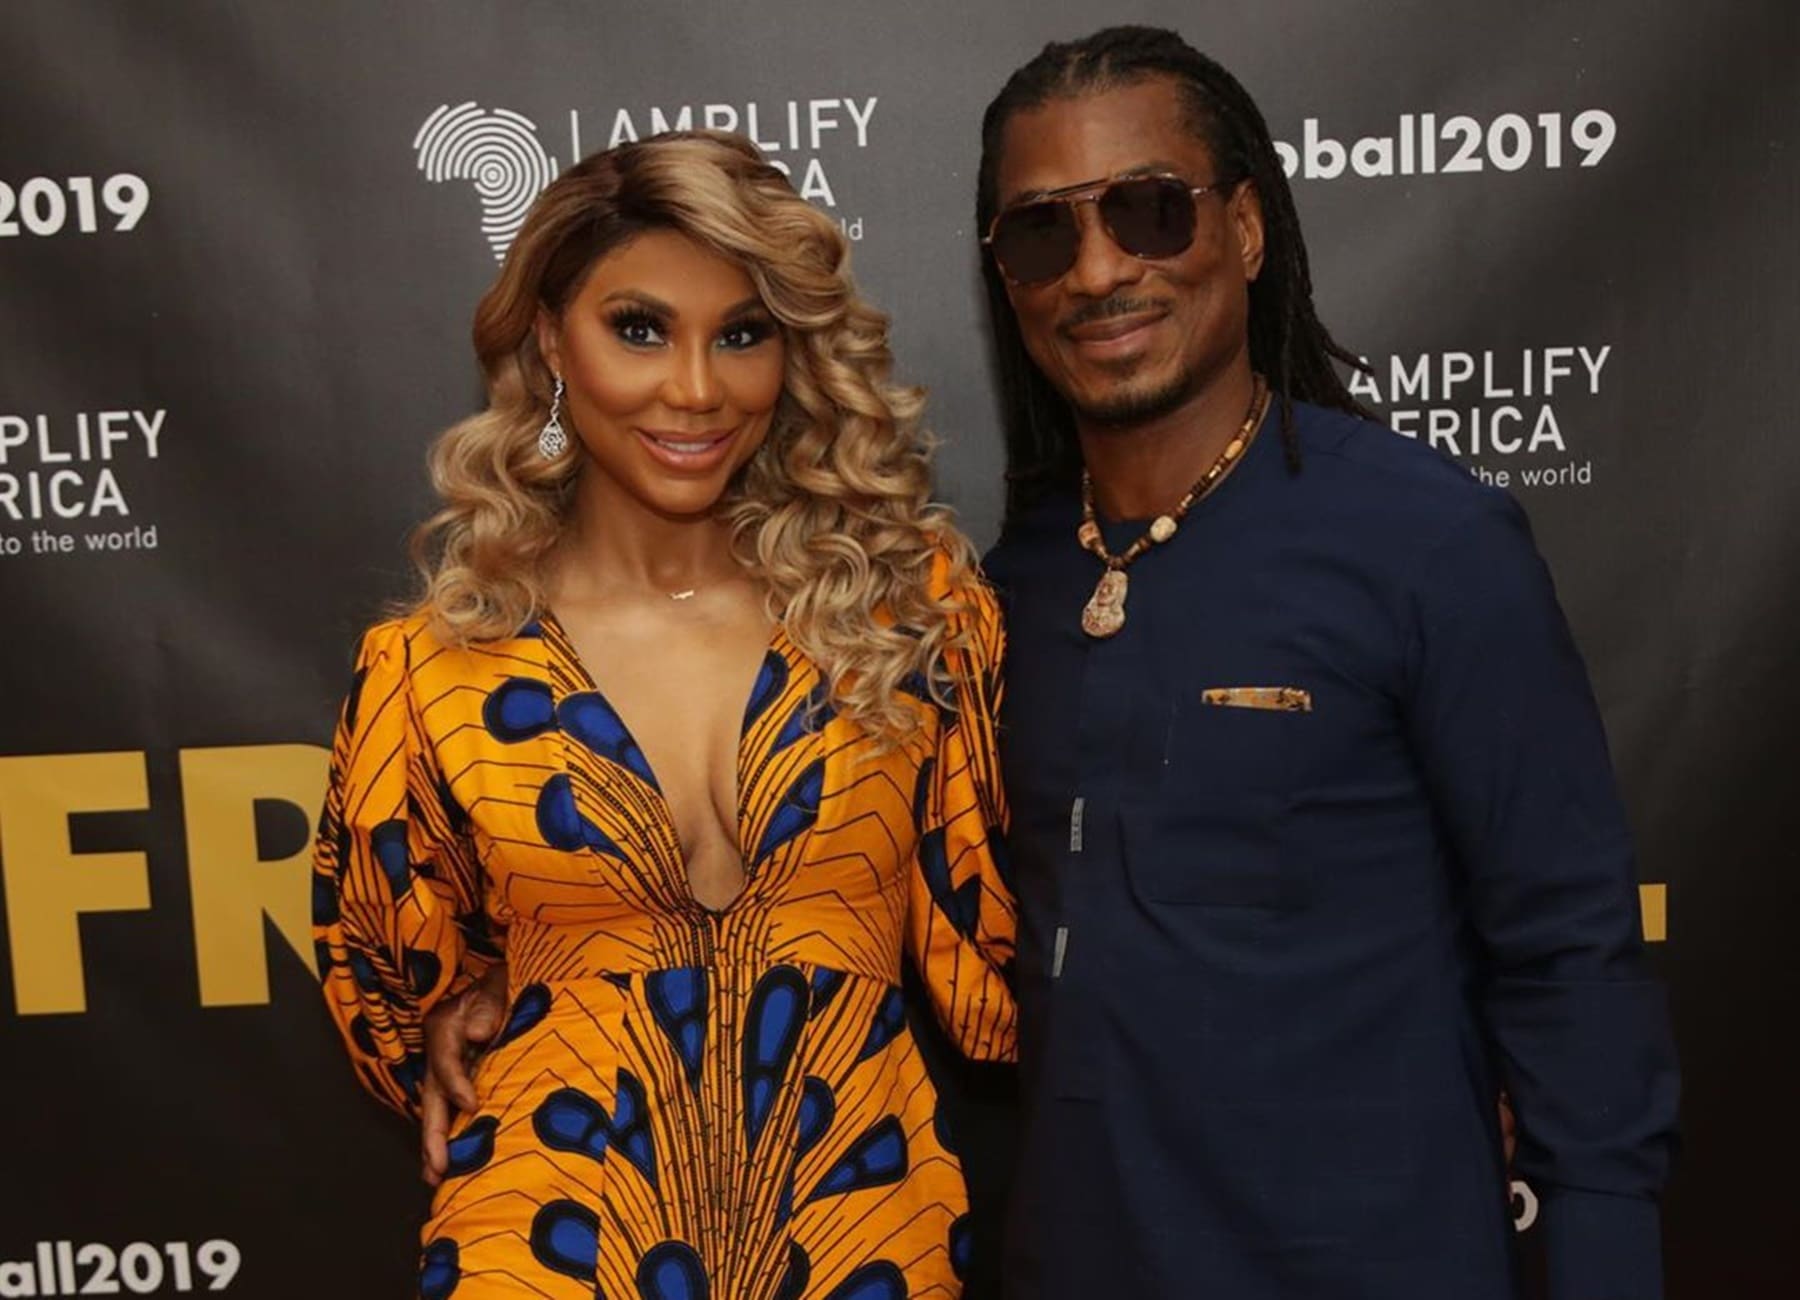 Tamar Braxton's BF, David Adefeso Shares The Most Powerful Message Of Love And Support You'll See - Check It Out Here To See Tamar Through His Eyes